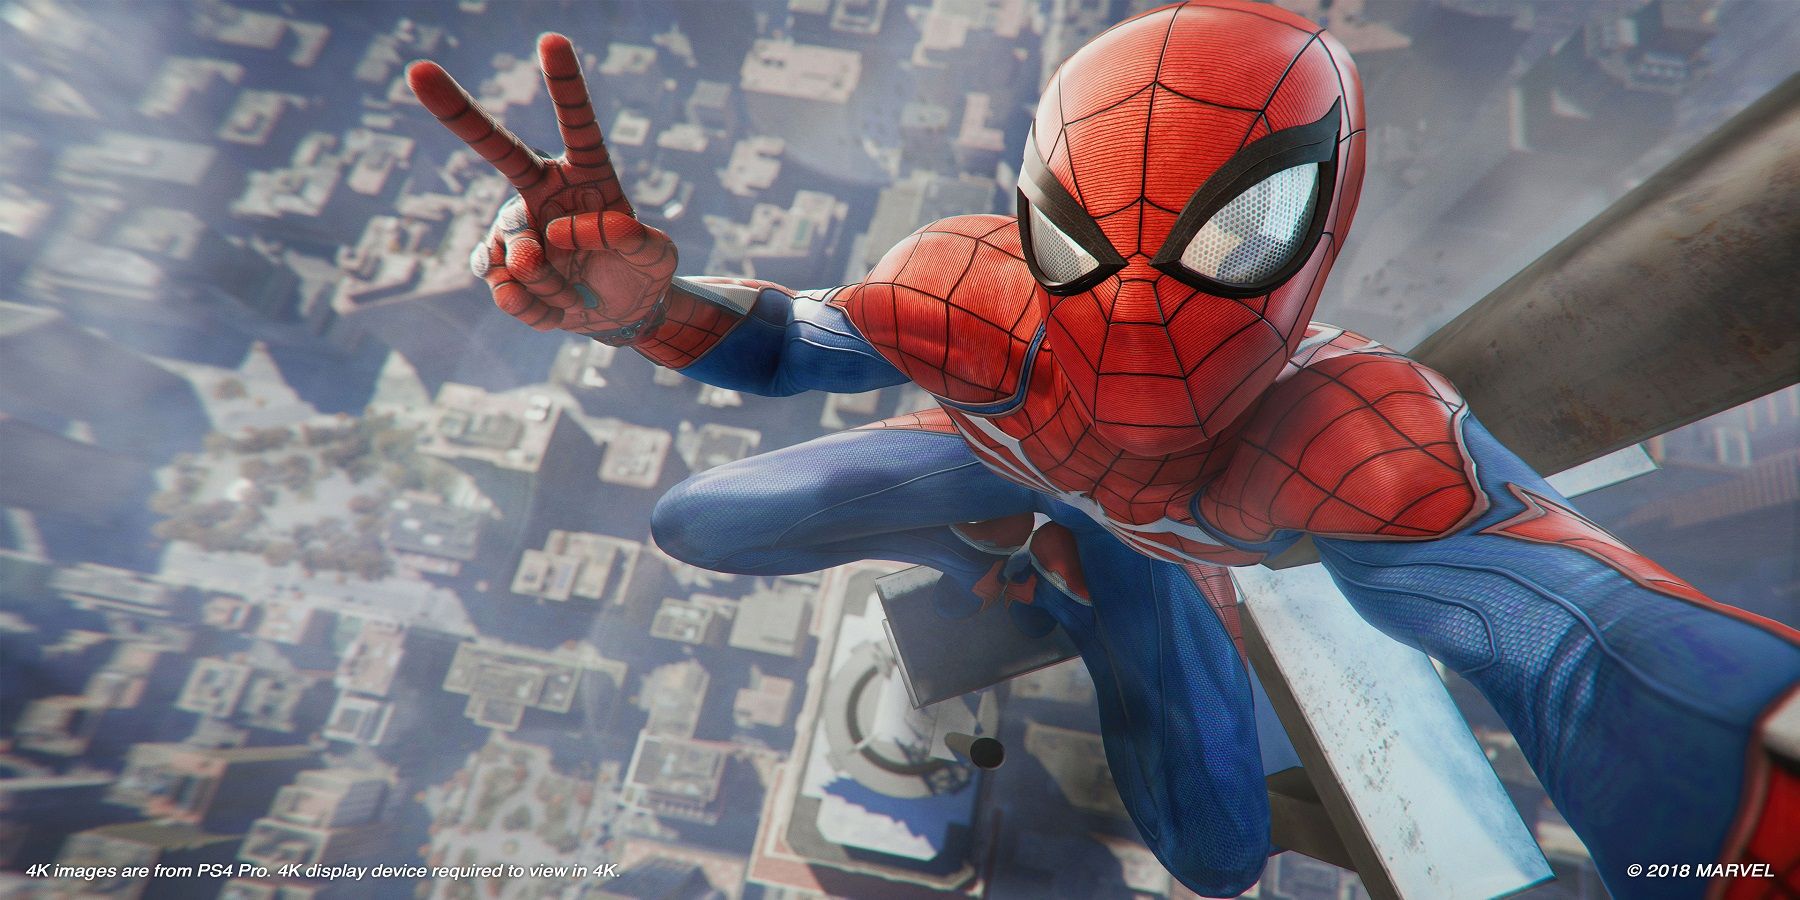 What would an actual super suit be made out of for Spider-Man? - Quora